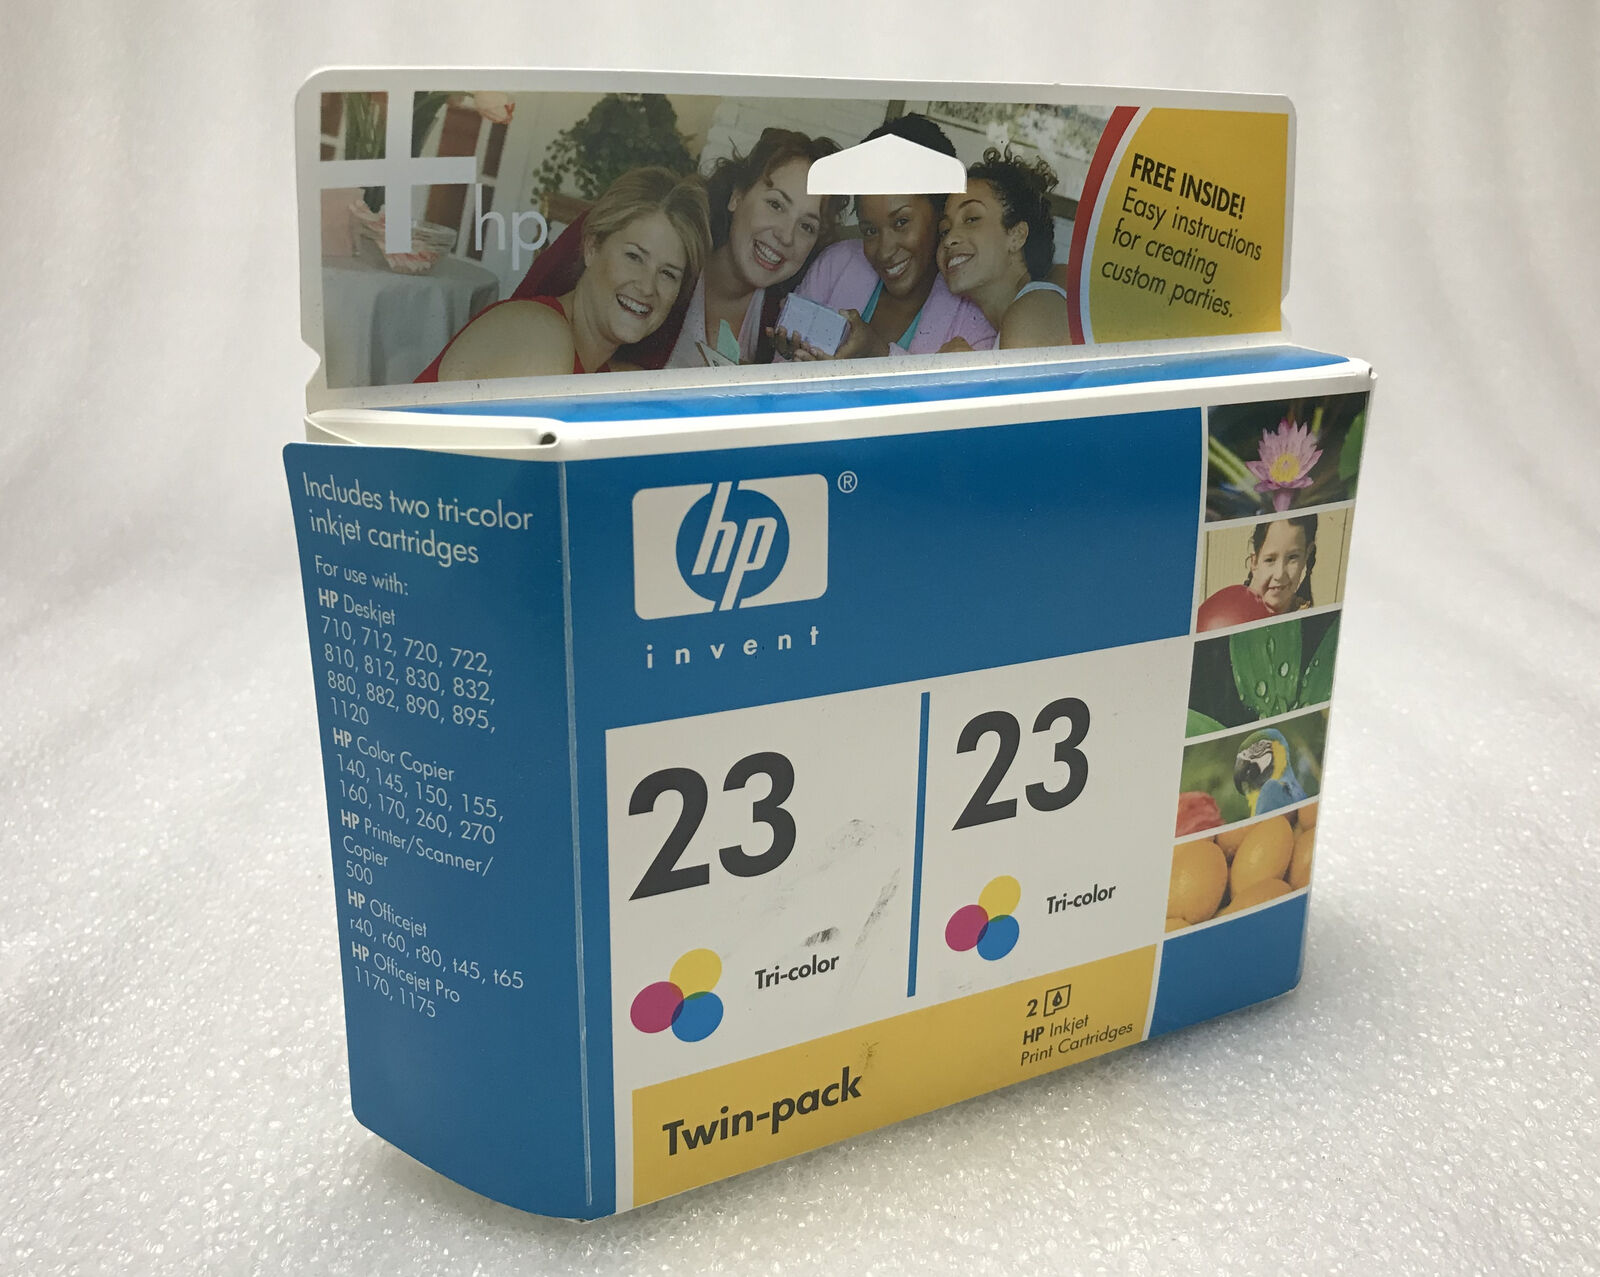 NEW Genuine OEM HP Invent 23 Tri-color Twin-pack includes 2 HP Inkjet Cartridges